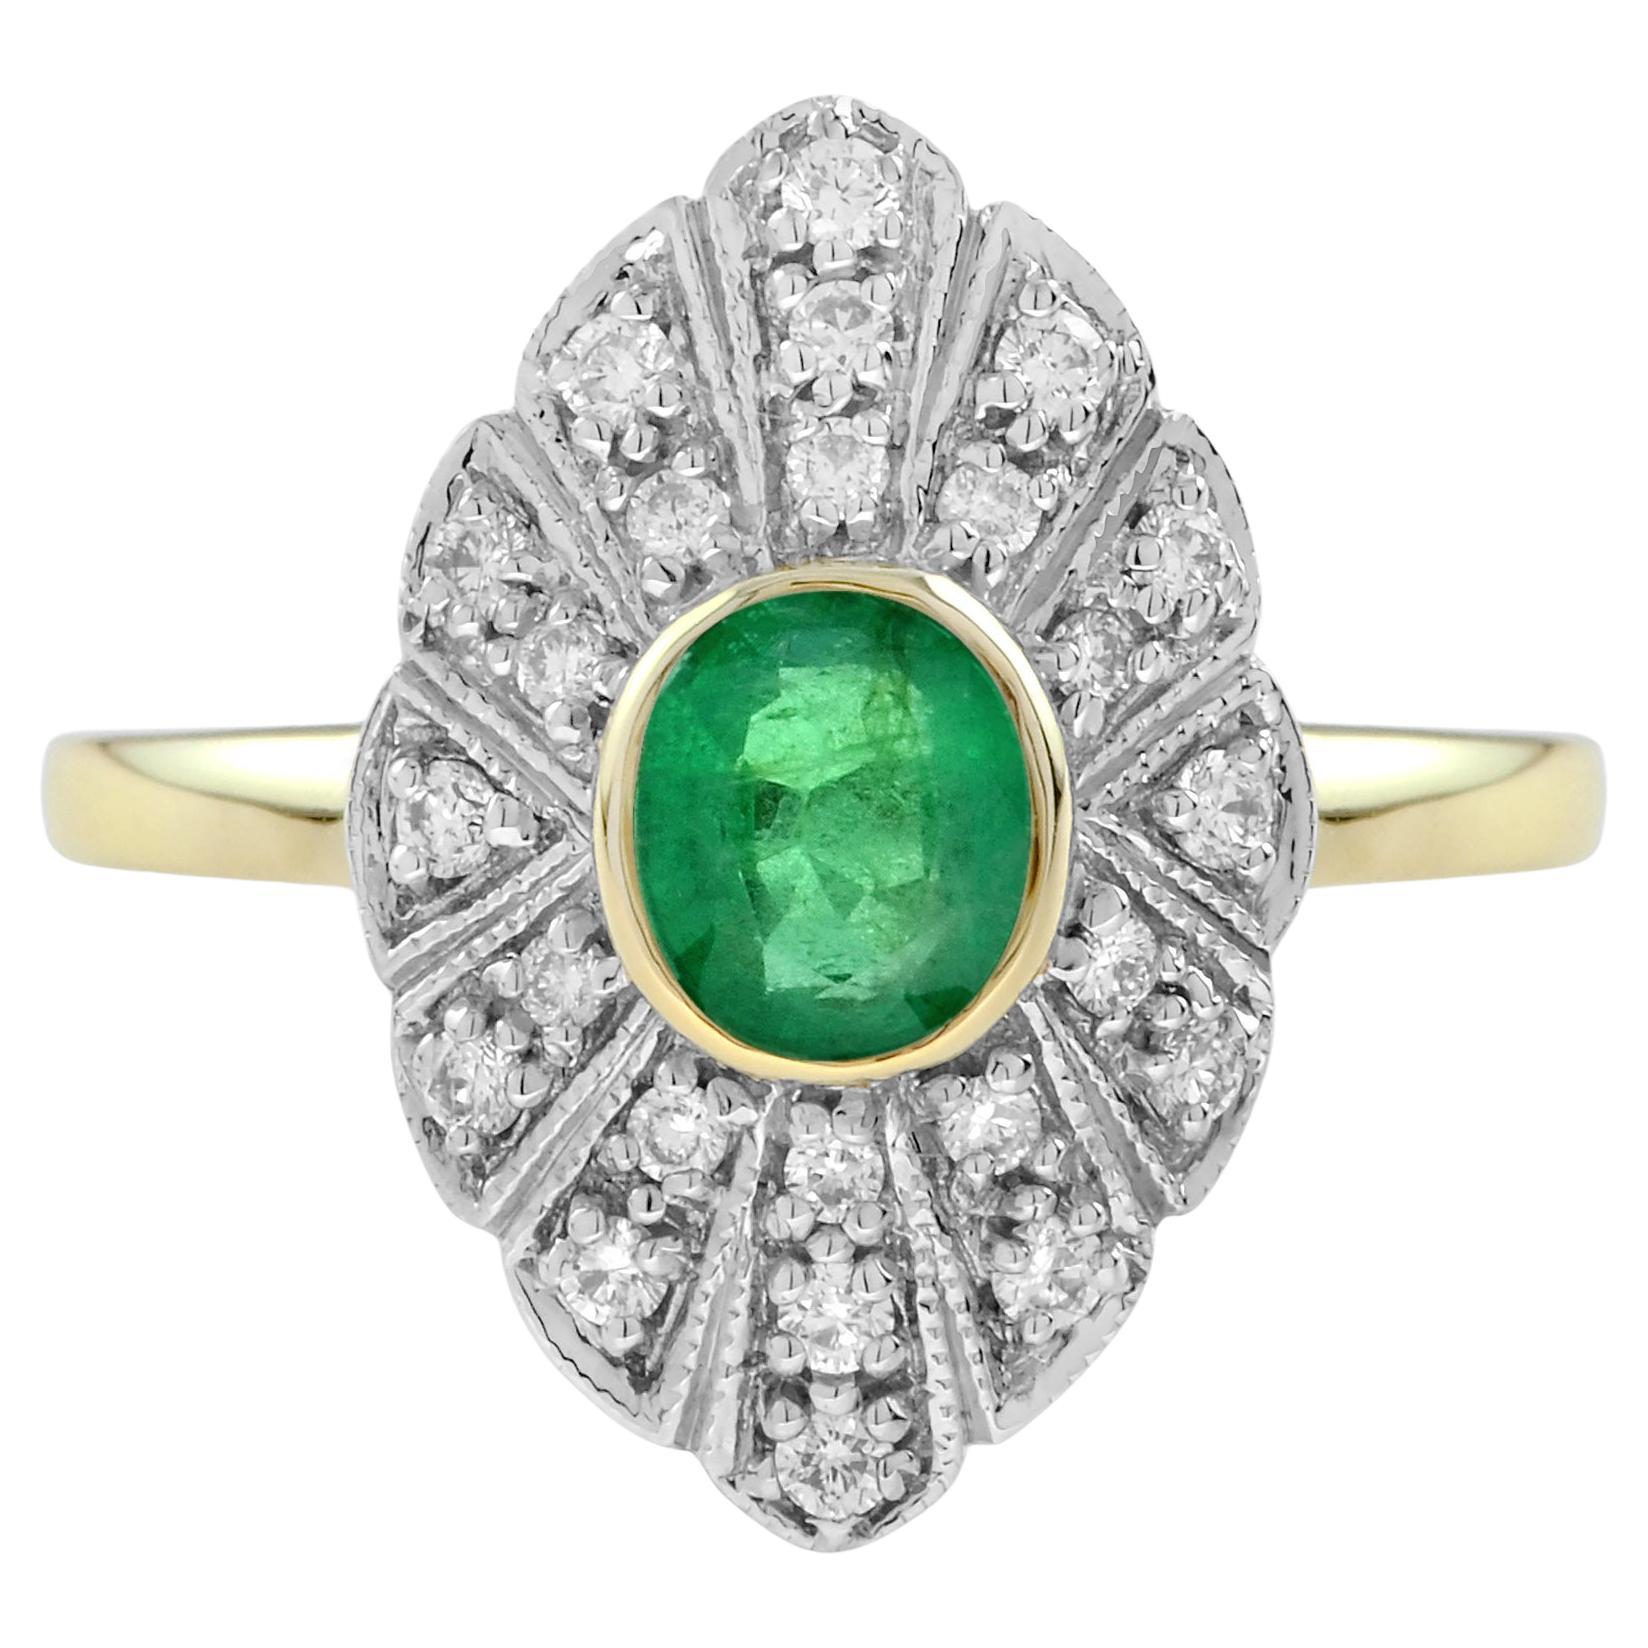 For Sale:  Oval Emerald and Diamond Marquise Shape Art Deco Style Ring in 9K Two Tone Gold